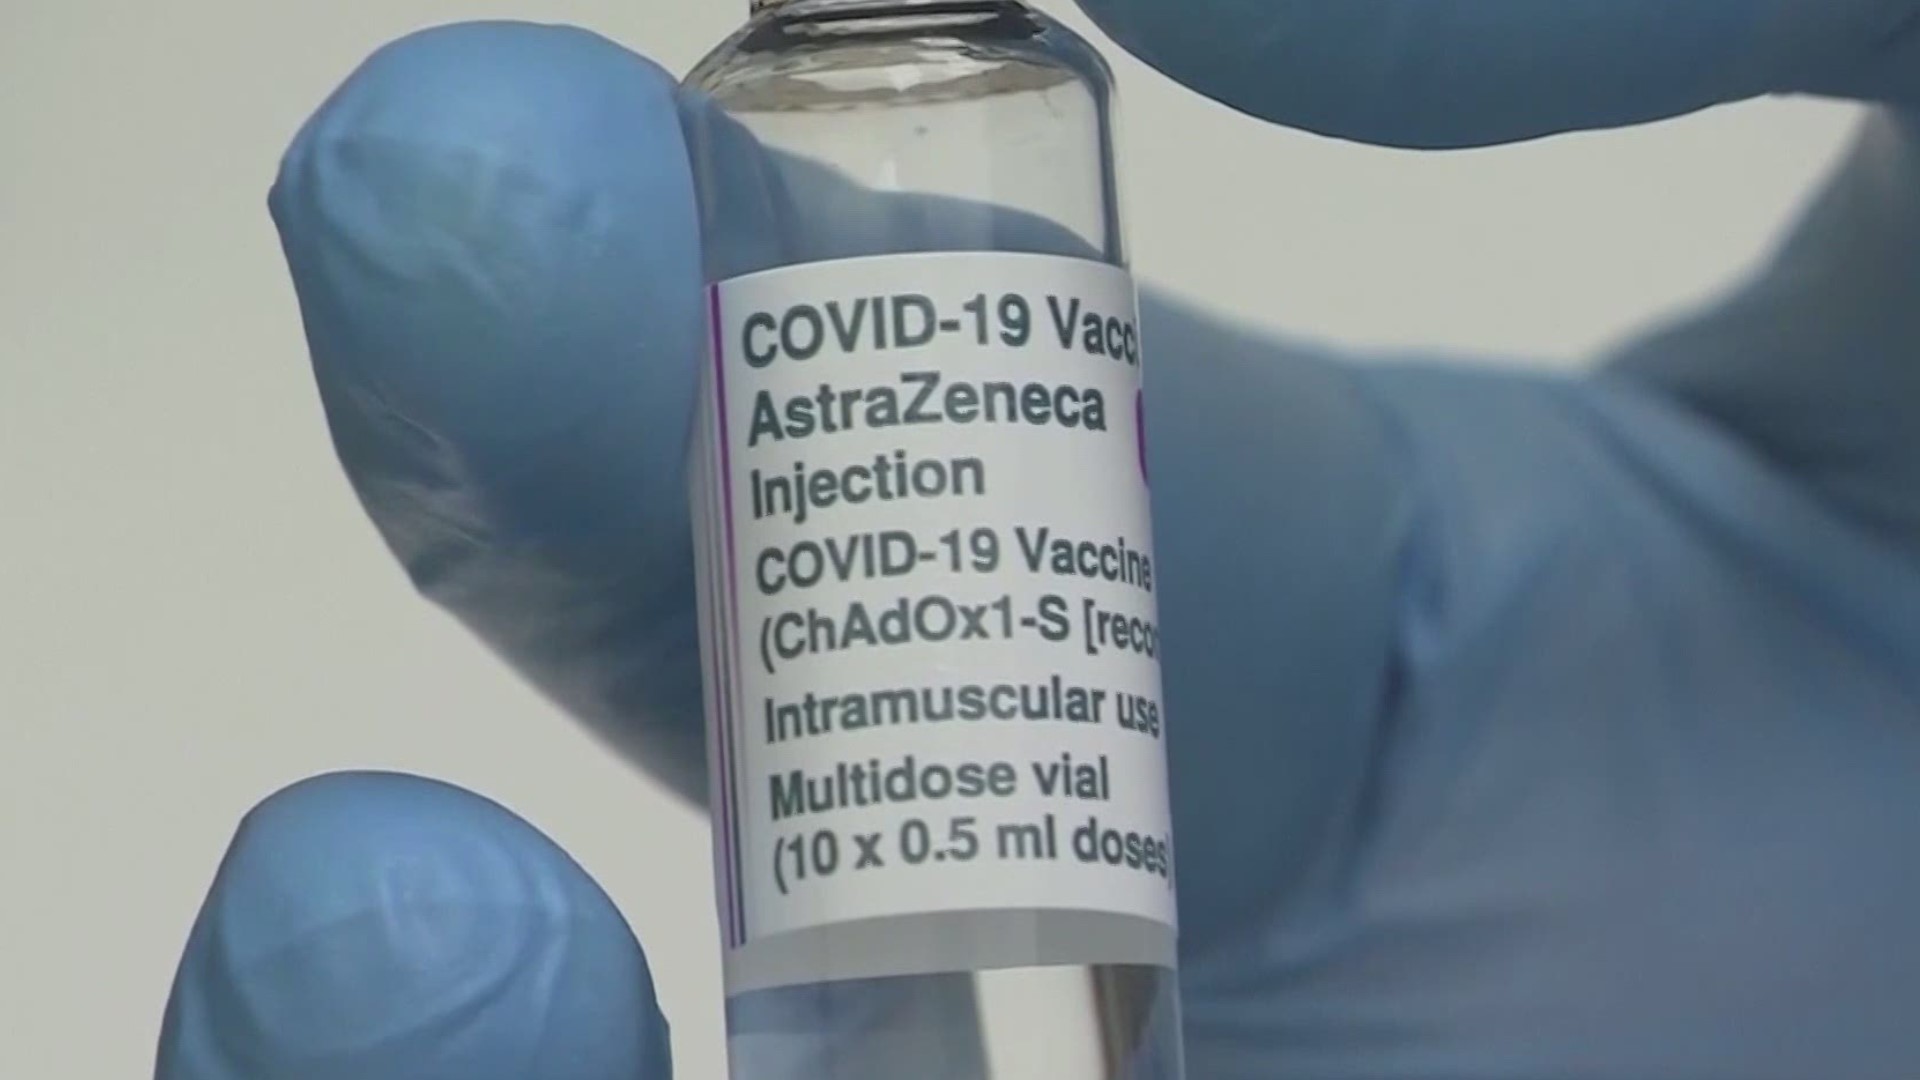 An efficacy rate at 79 percent puts AstraZeneca's vaccine on par with others from Pfizer, Moderna, and Johnson & Johnson.